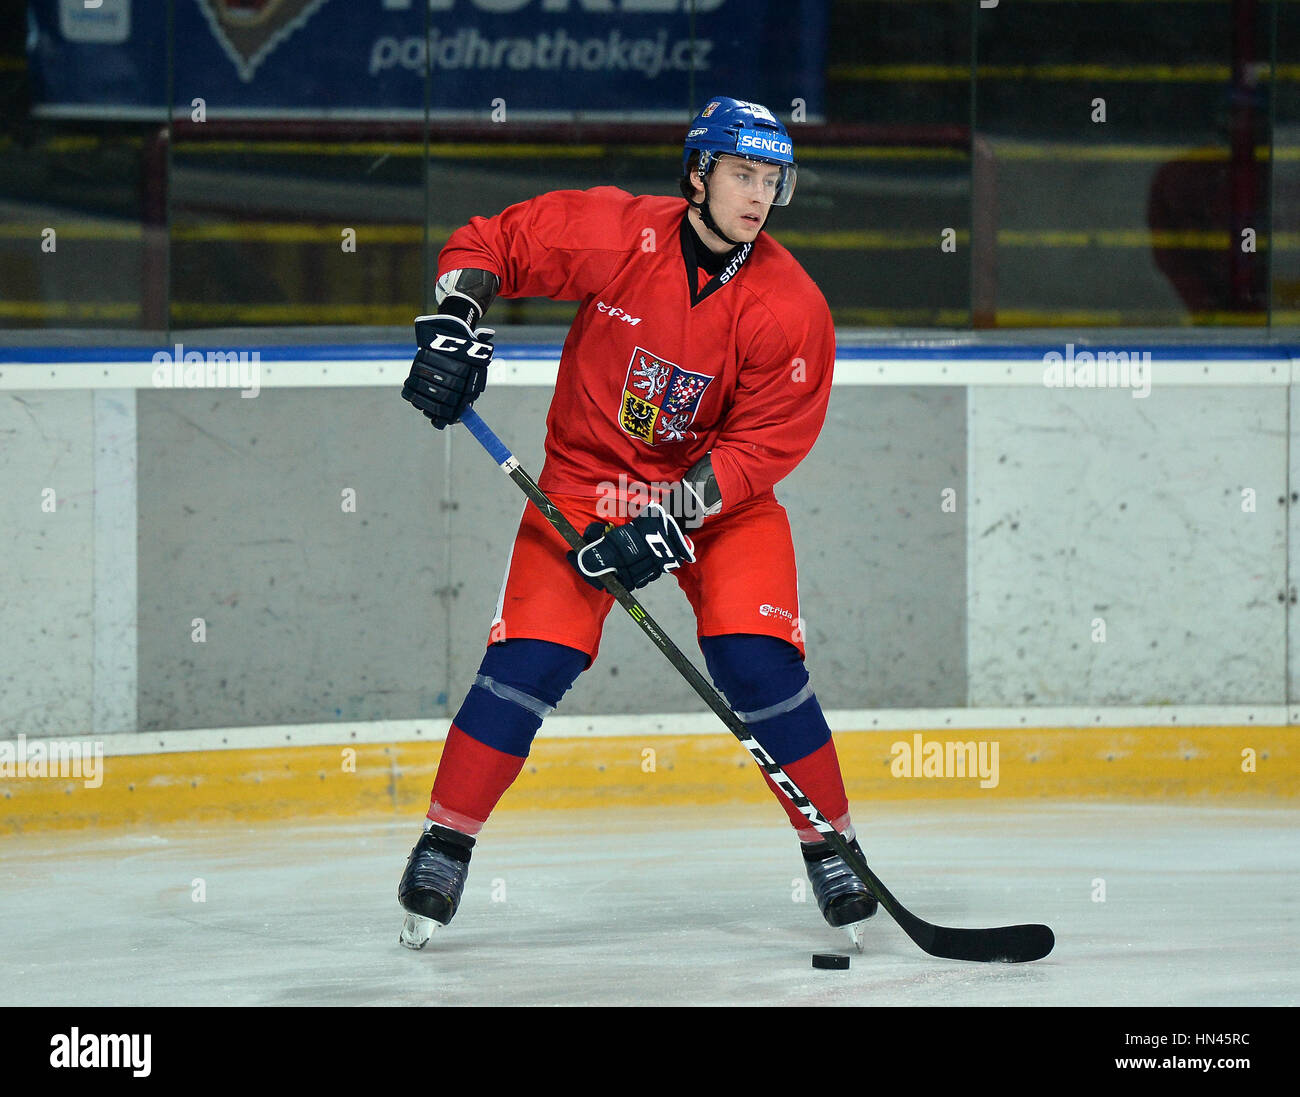 Prague, Czech Republic. 08th Feb, 2017. The Czech national ice-hockey team's player Lukas Klok in action during the training session prior to the February Sweden Games in Gothenburg in Prague, Czech Republic, February 8, 2017. Sweden Games, the third part of the European Hockey Tour (EHT) series, will take place on February 9-12. Credit: Katerina Sulova/CTK Photo/Alamy Live News Stock Photo